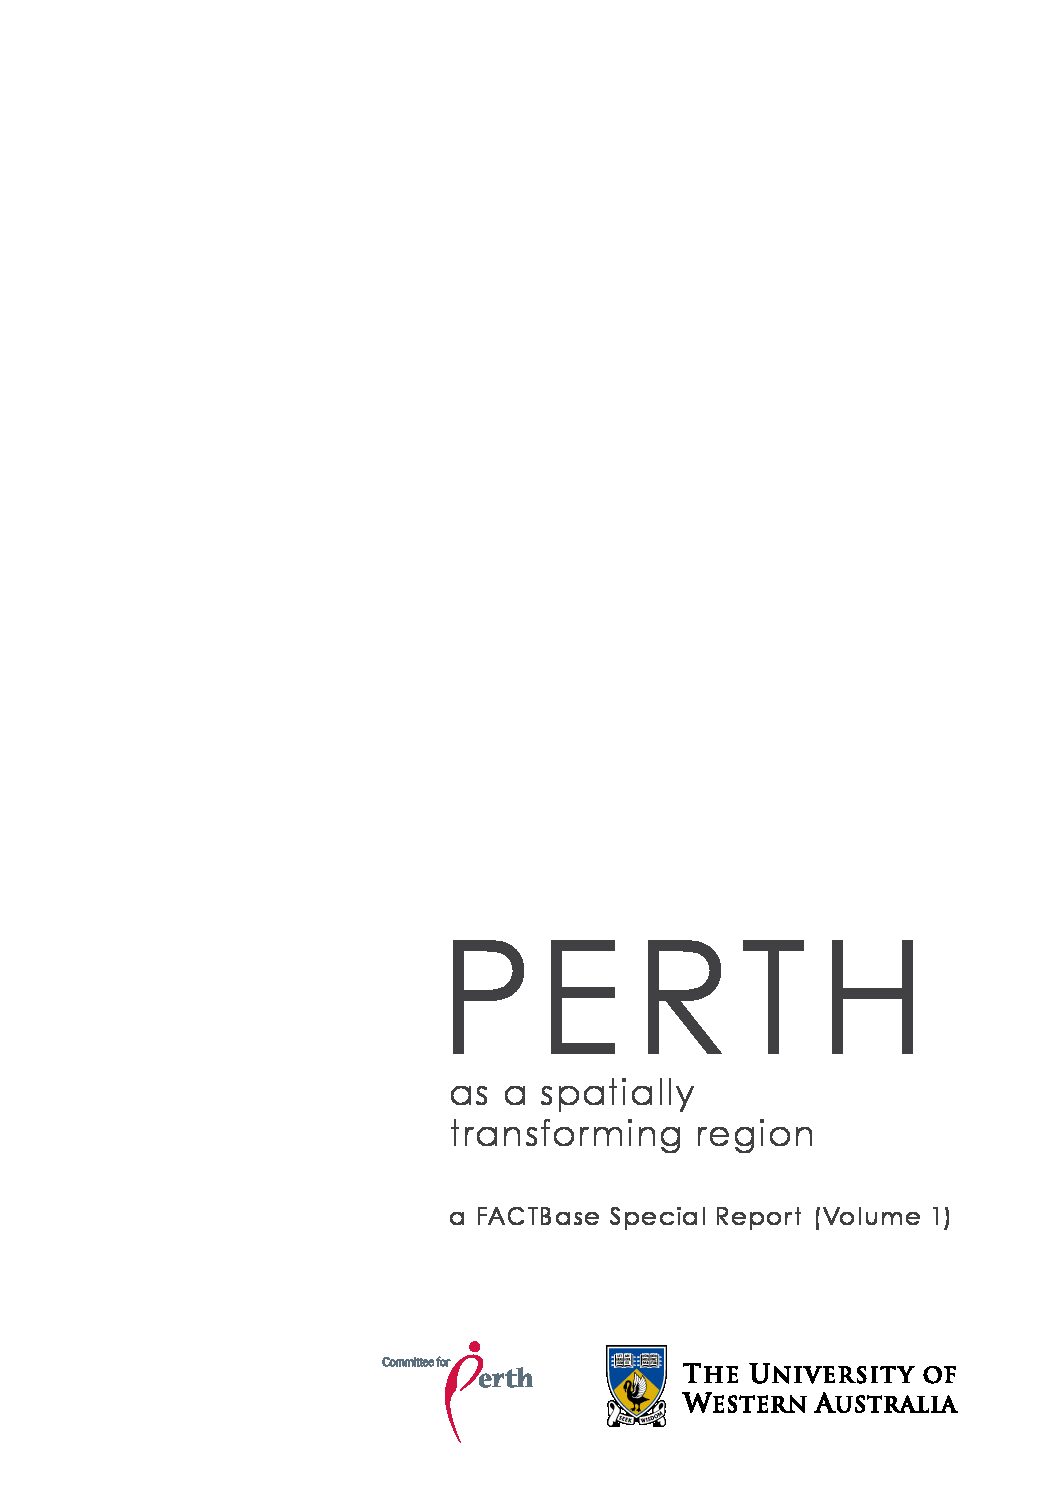 FACTBase Special Report - Perth as a spatially transforming region: Volume 1 - March 2015